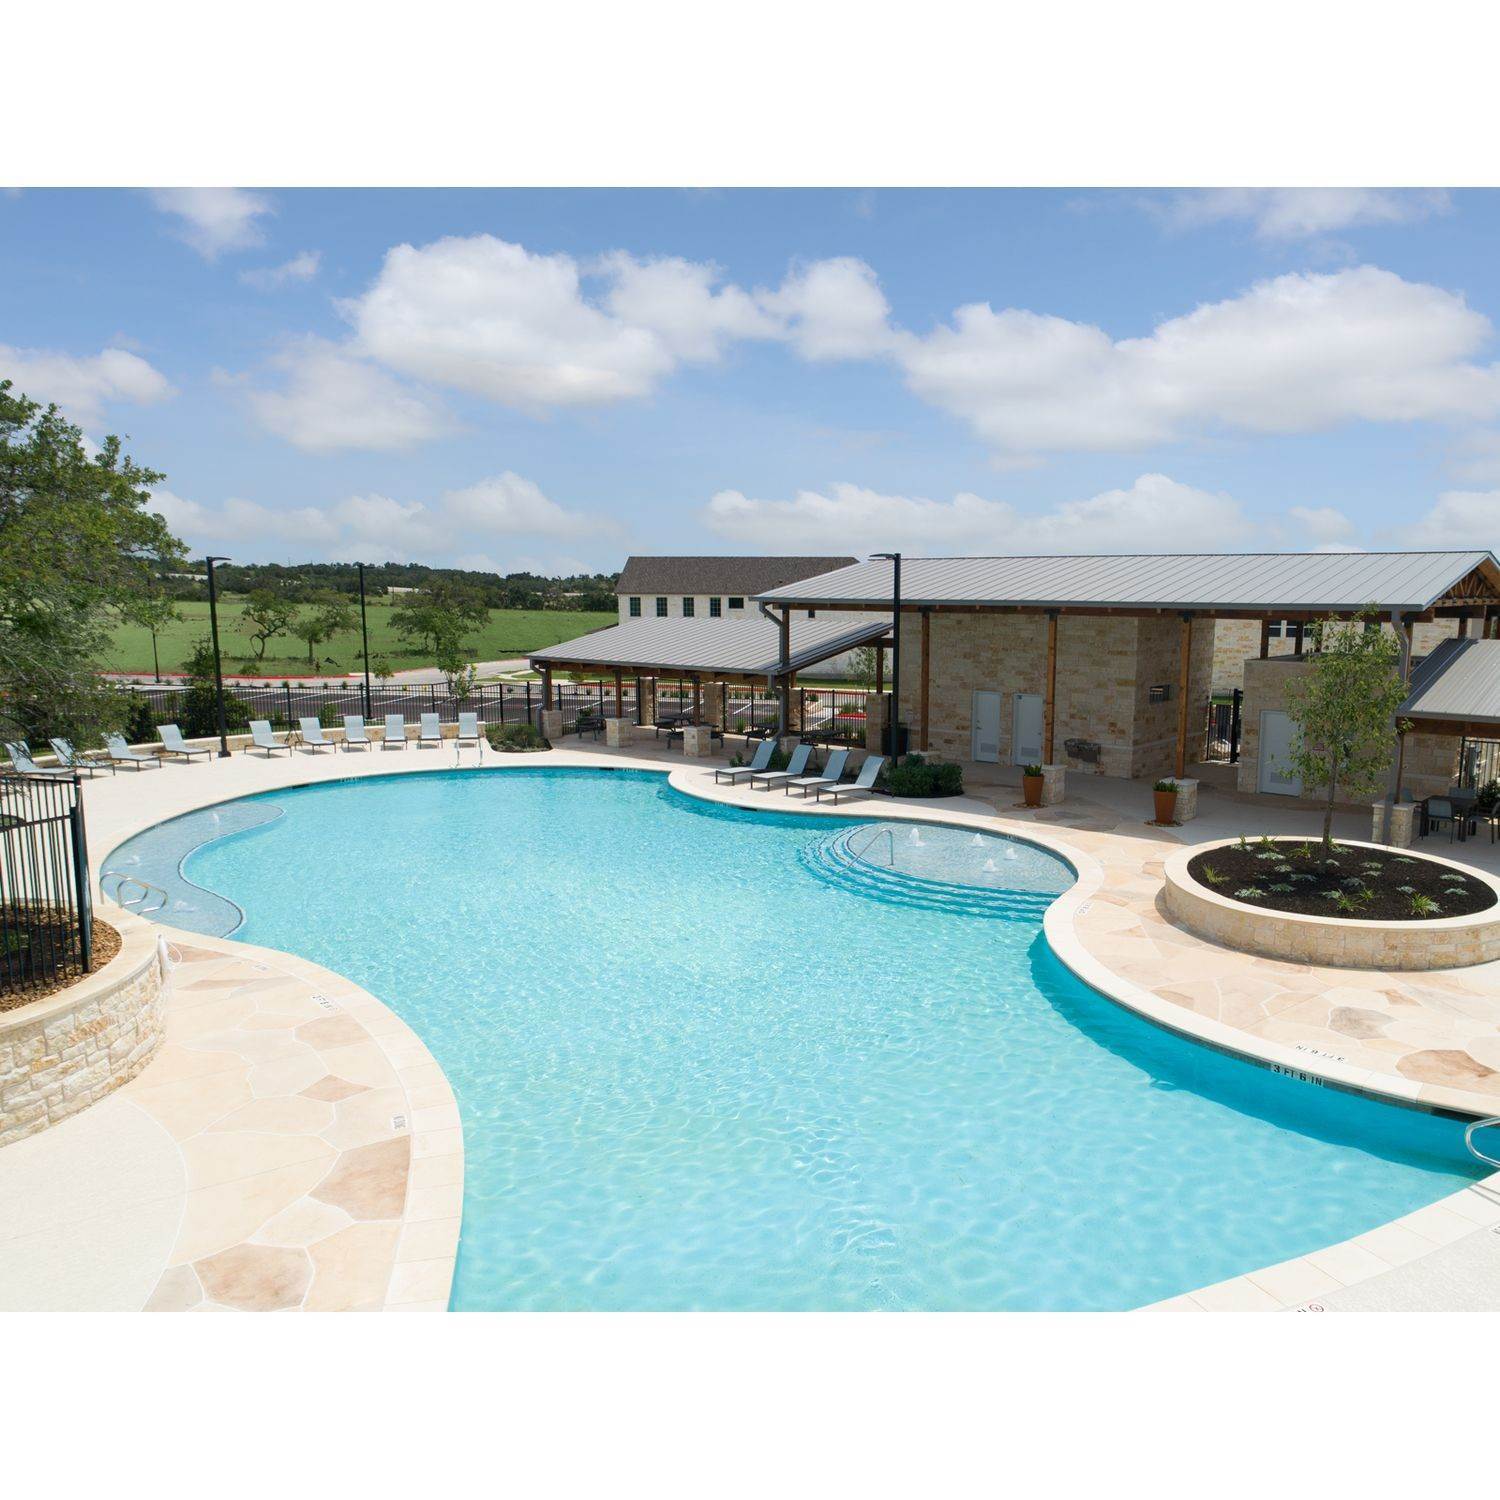 13. Big Sky Ranch - Heritage Collection bâtiment à 644 Lone Peak Way, Dripping Springs, TX 78620